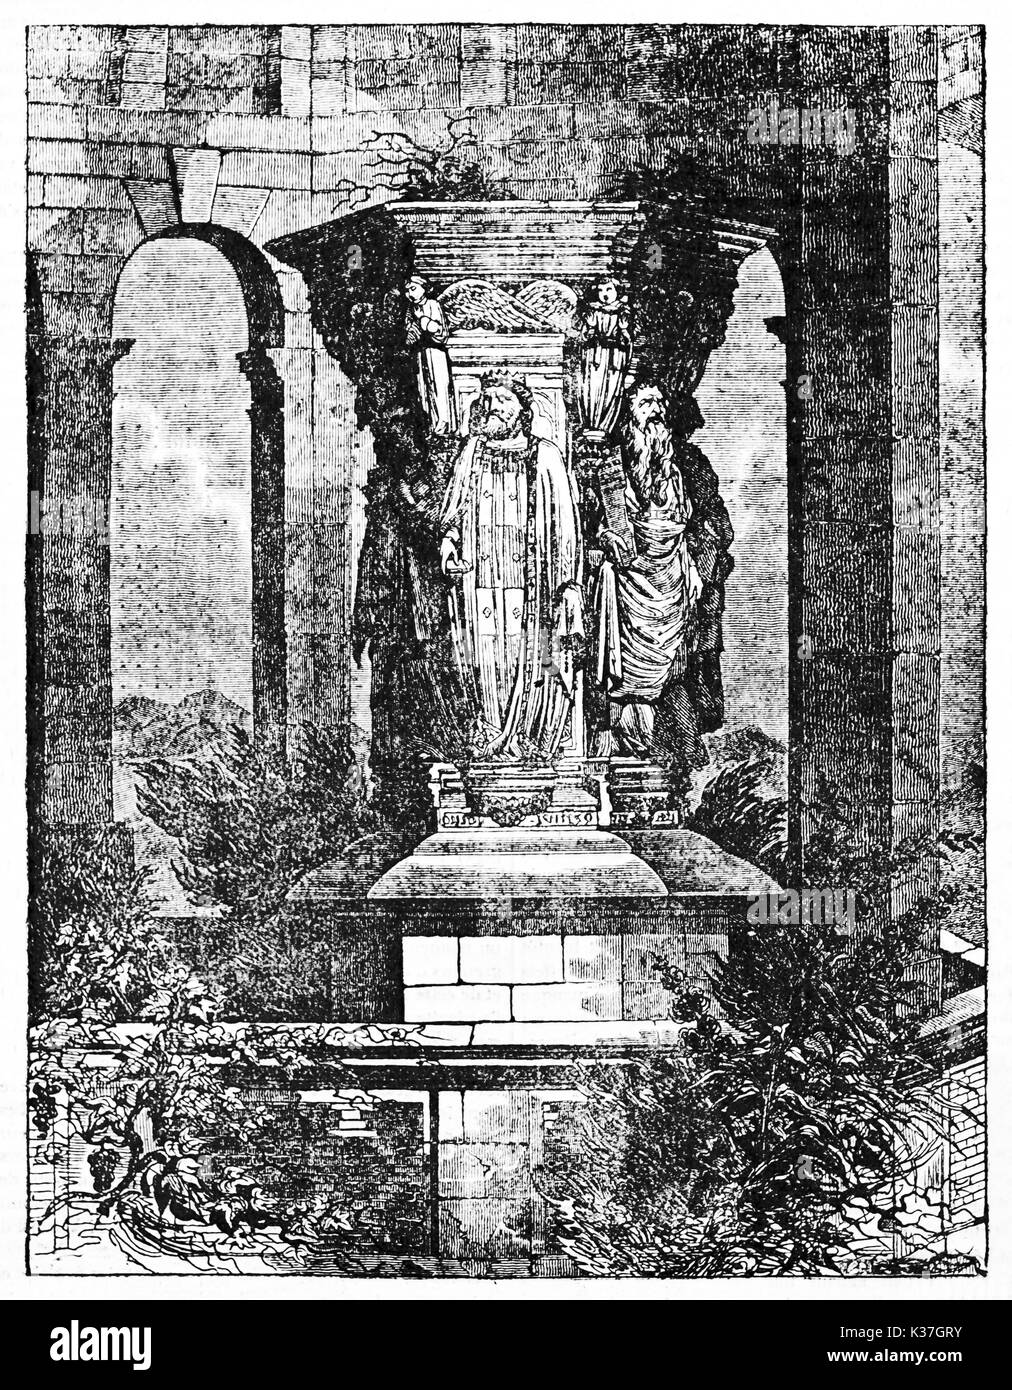 The Well of Mose Dijon France, ancient medieval stone monument holded by human statues. Rough illustration by unidentified author published on Magasin Pittoresque Paris 1834 Stock Photo